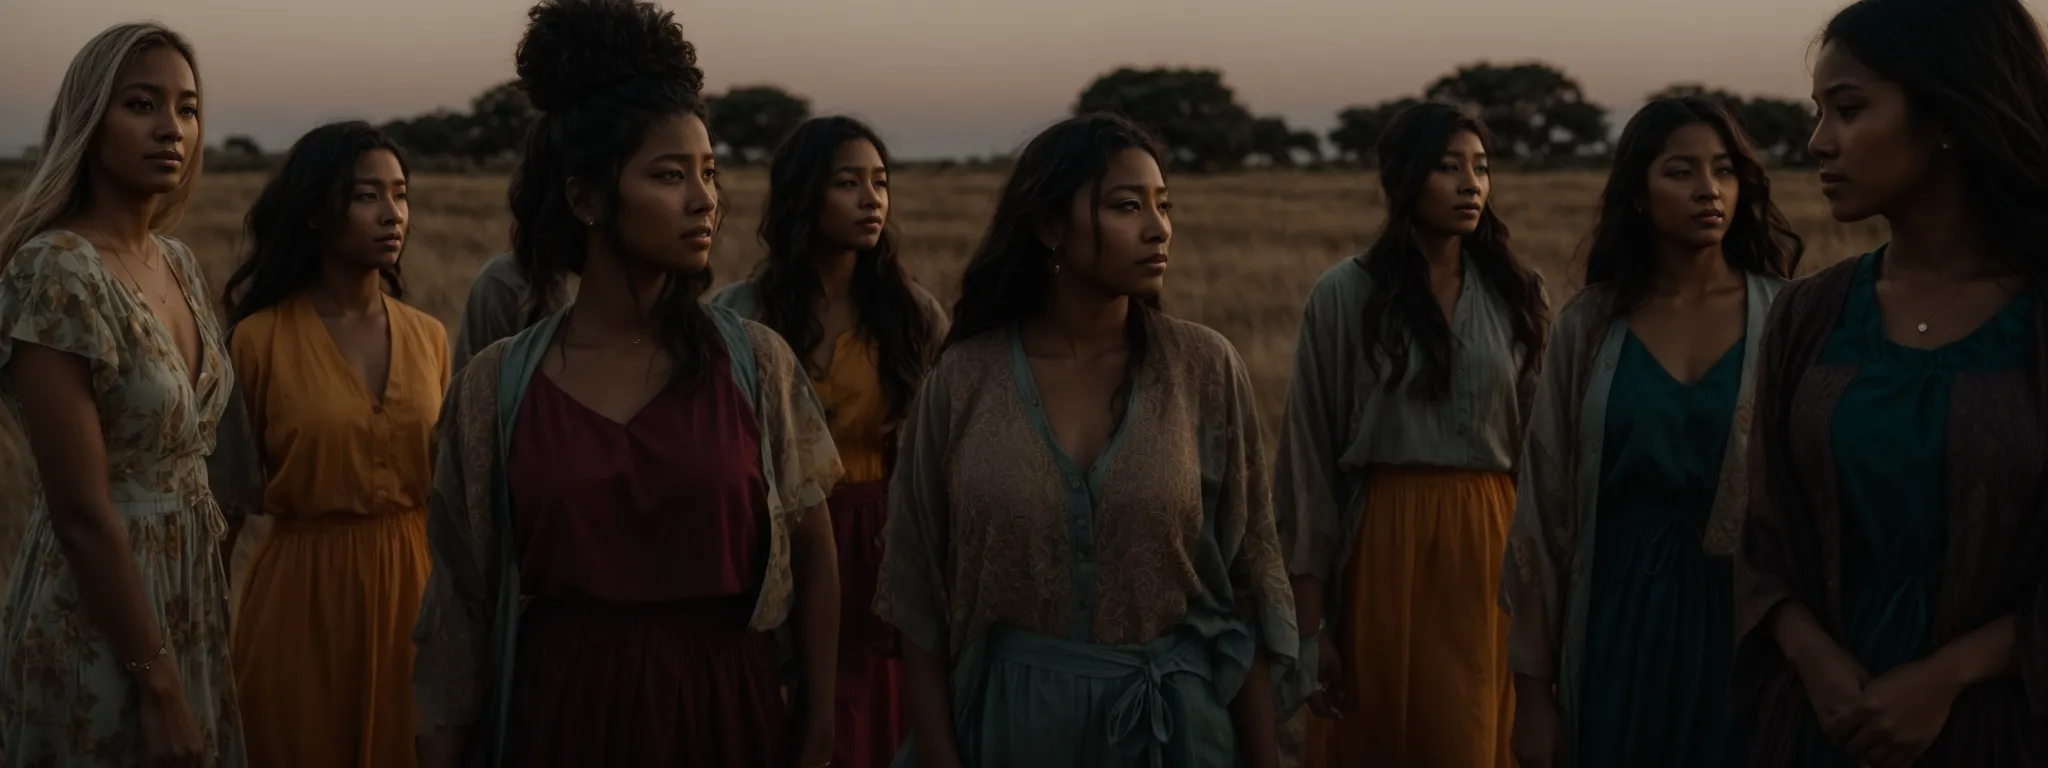 a group of diverse women stand together, confidently looking towards the horizon at sunset.